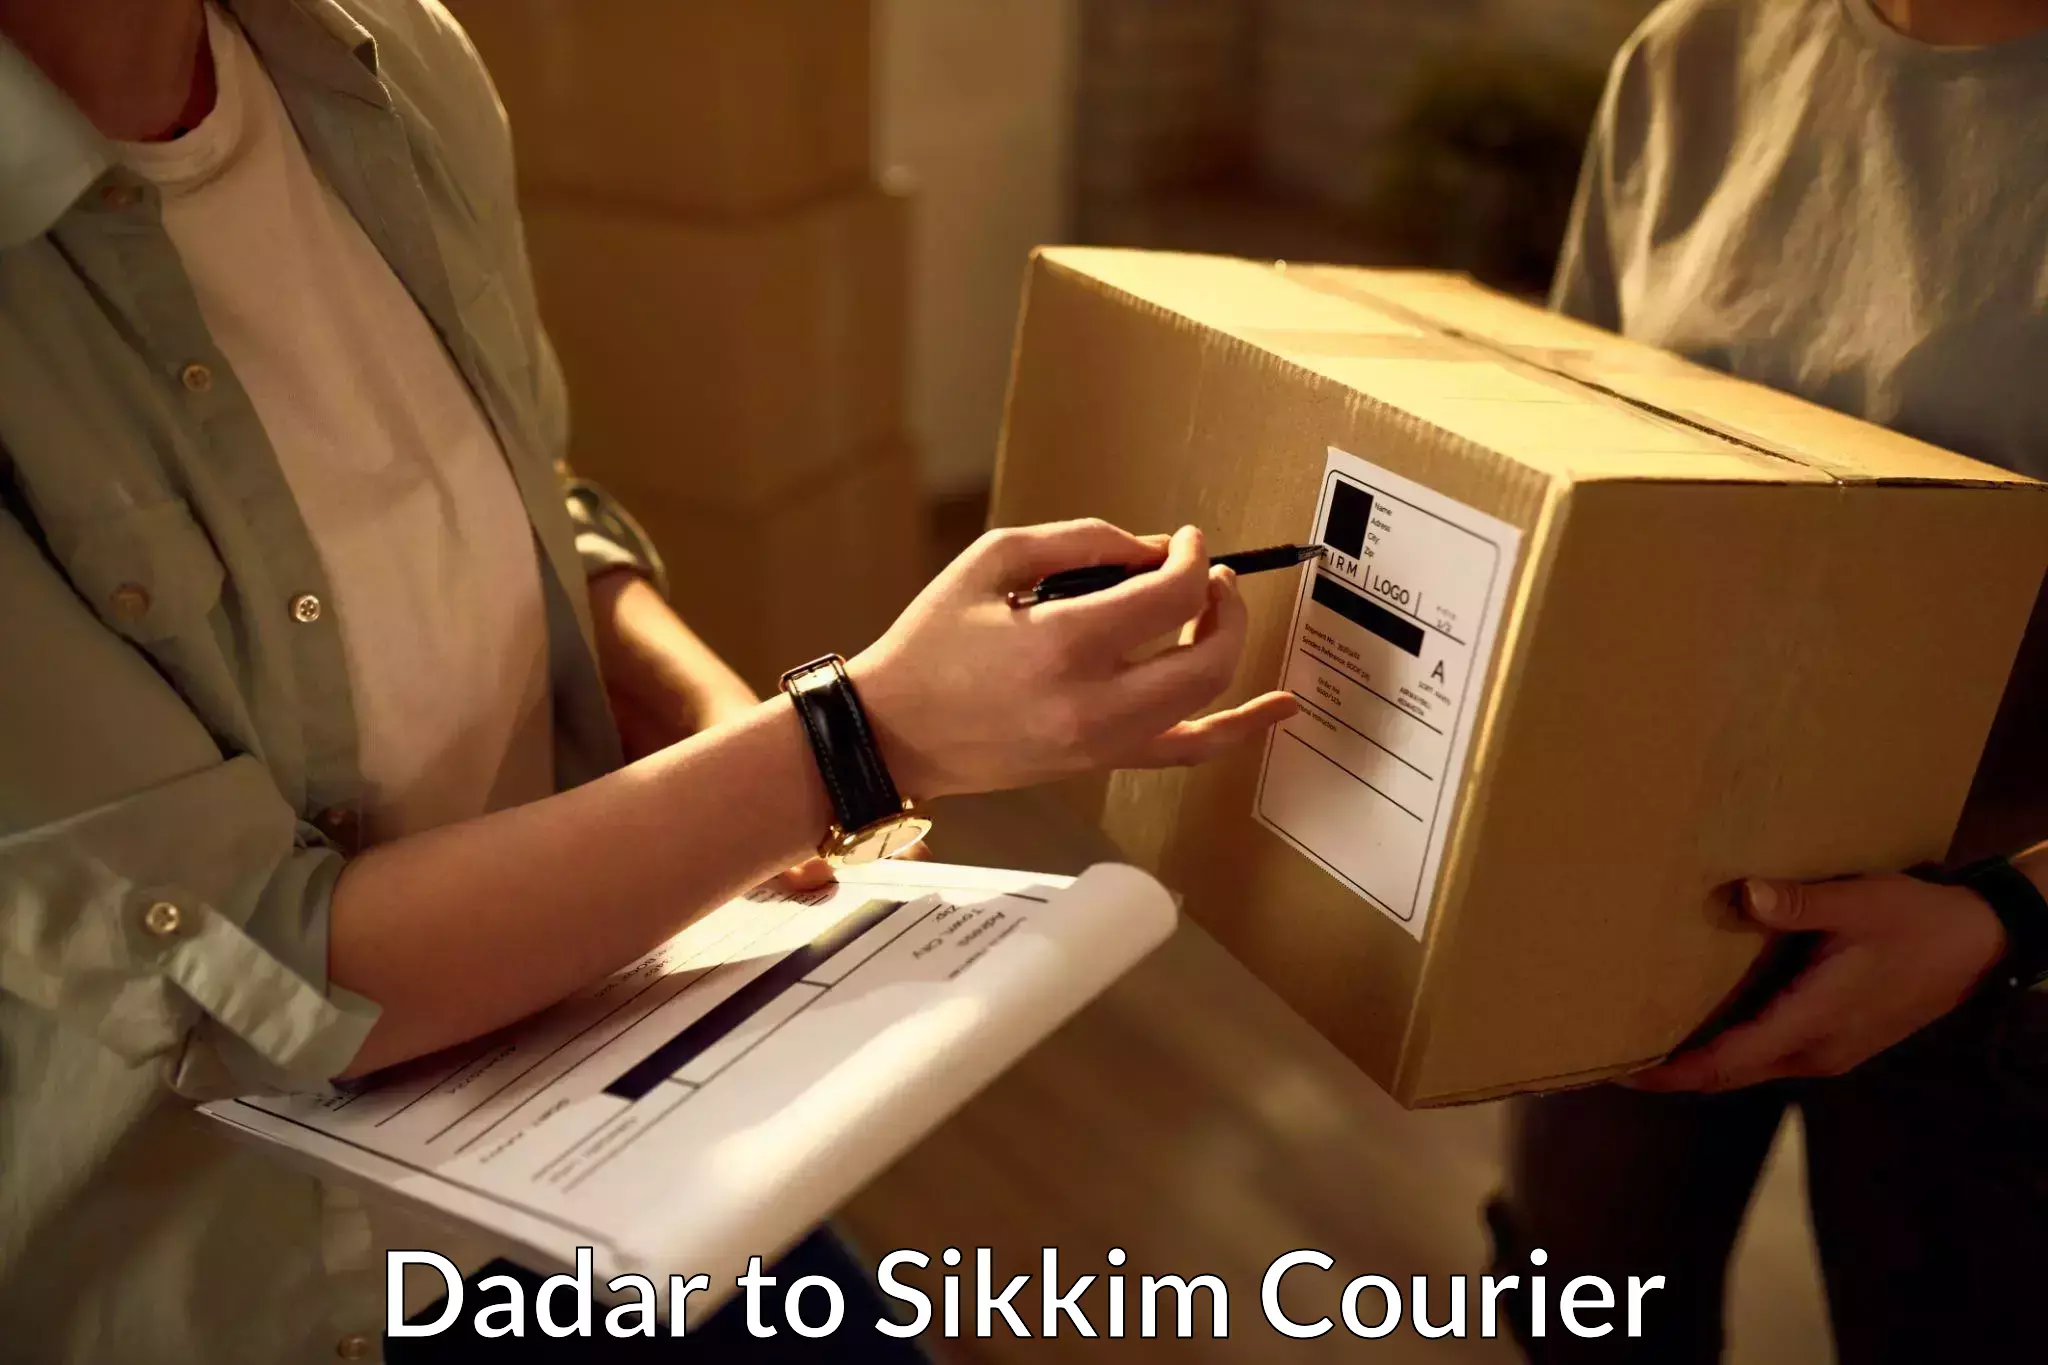 Global courier networks Dadar to Rangpo